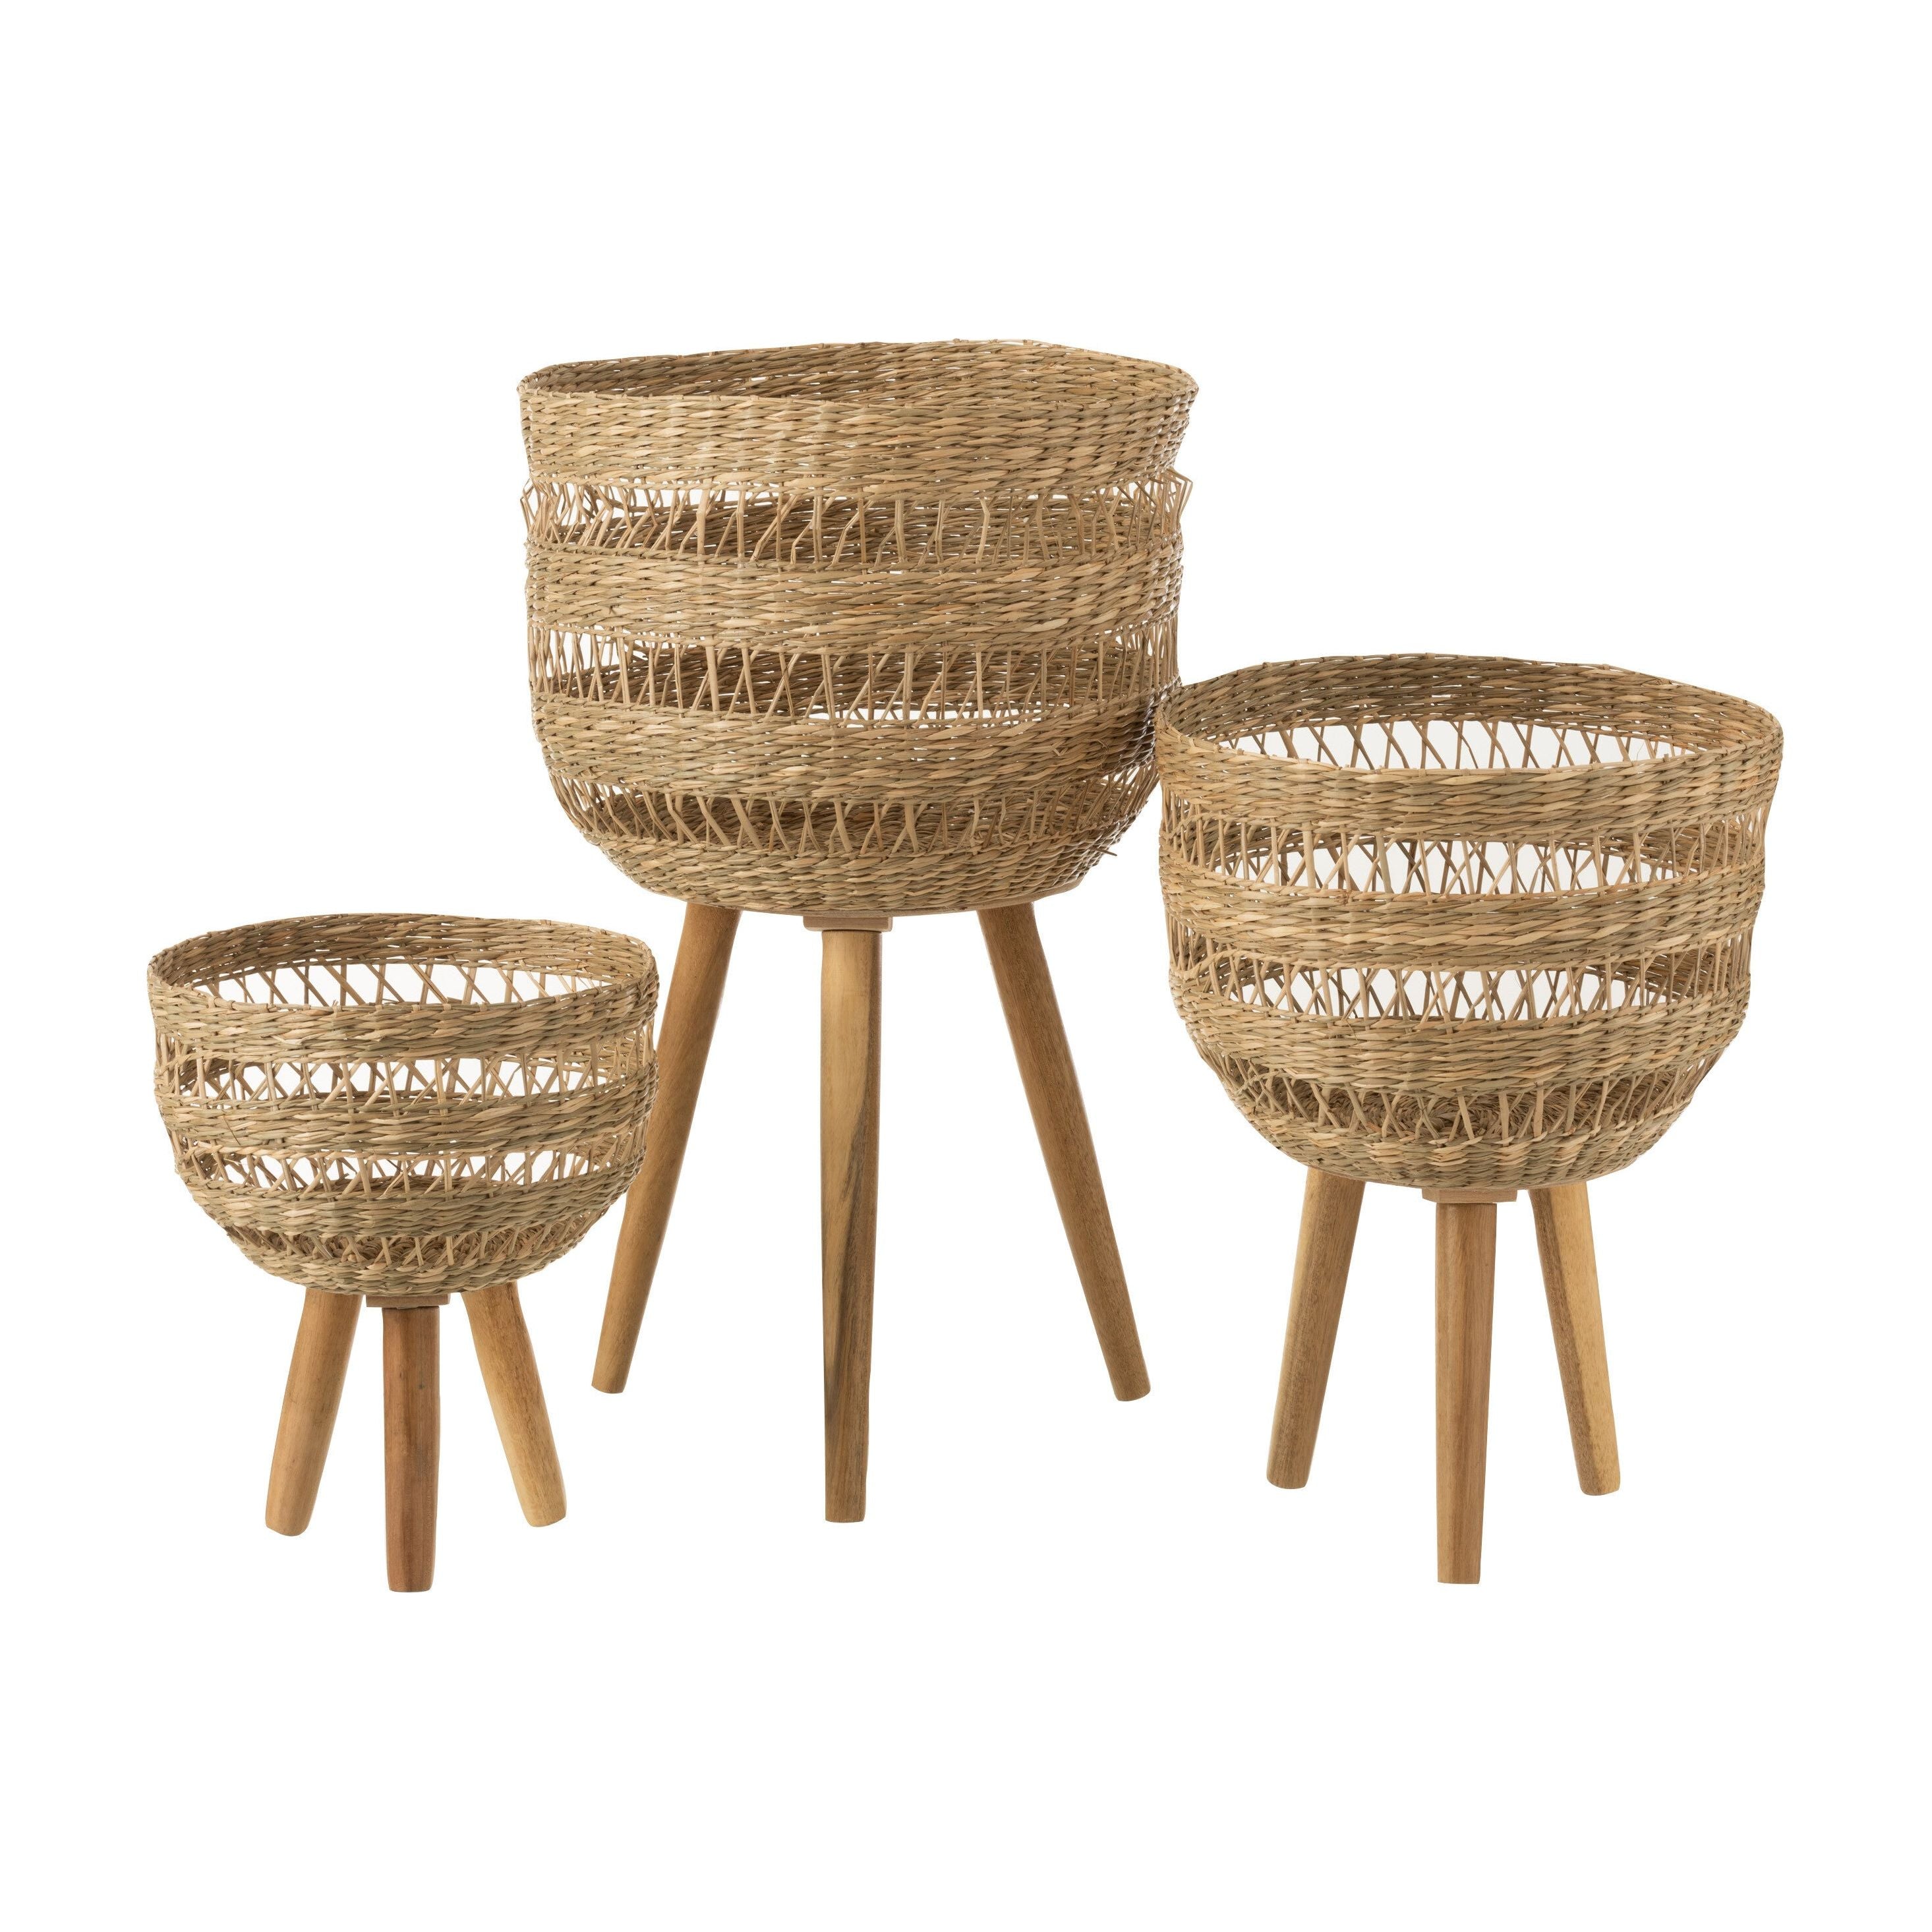 Baskets On Tripod Seagrass Natural